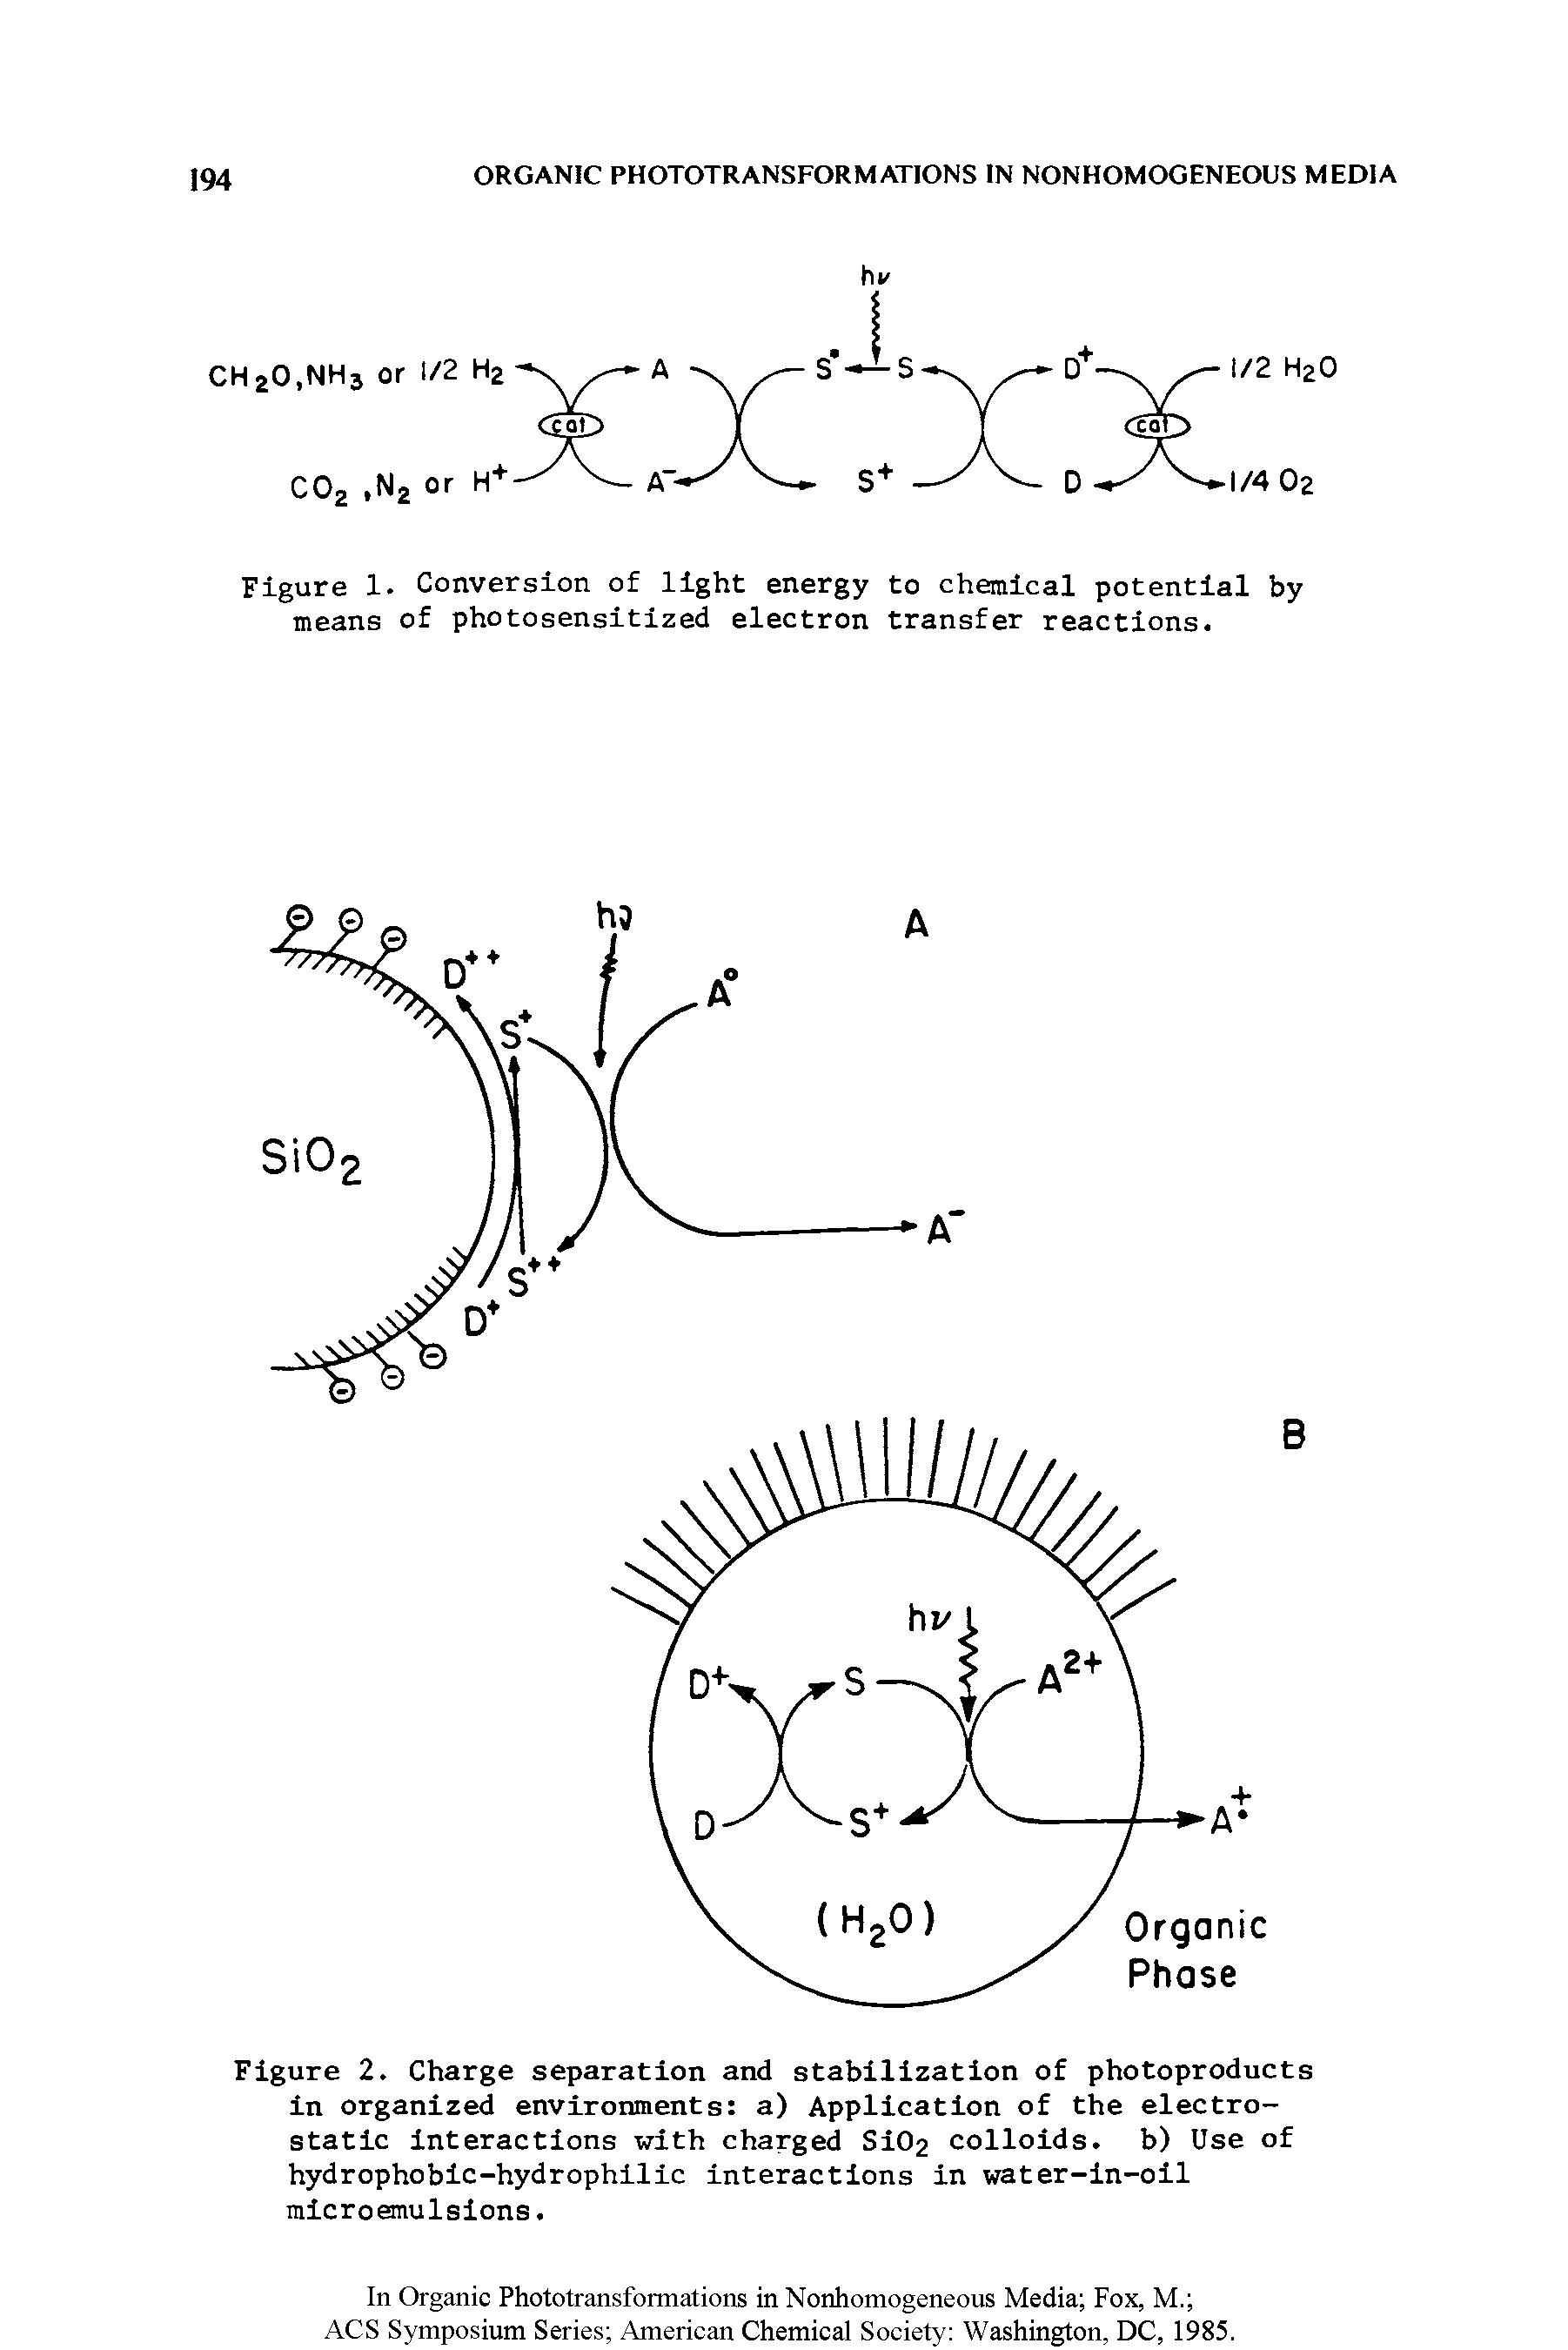 Figure 1. Conversion of light energy to chemical potential by means of photosensitized electron transfer reactions.